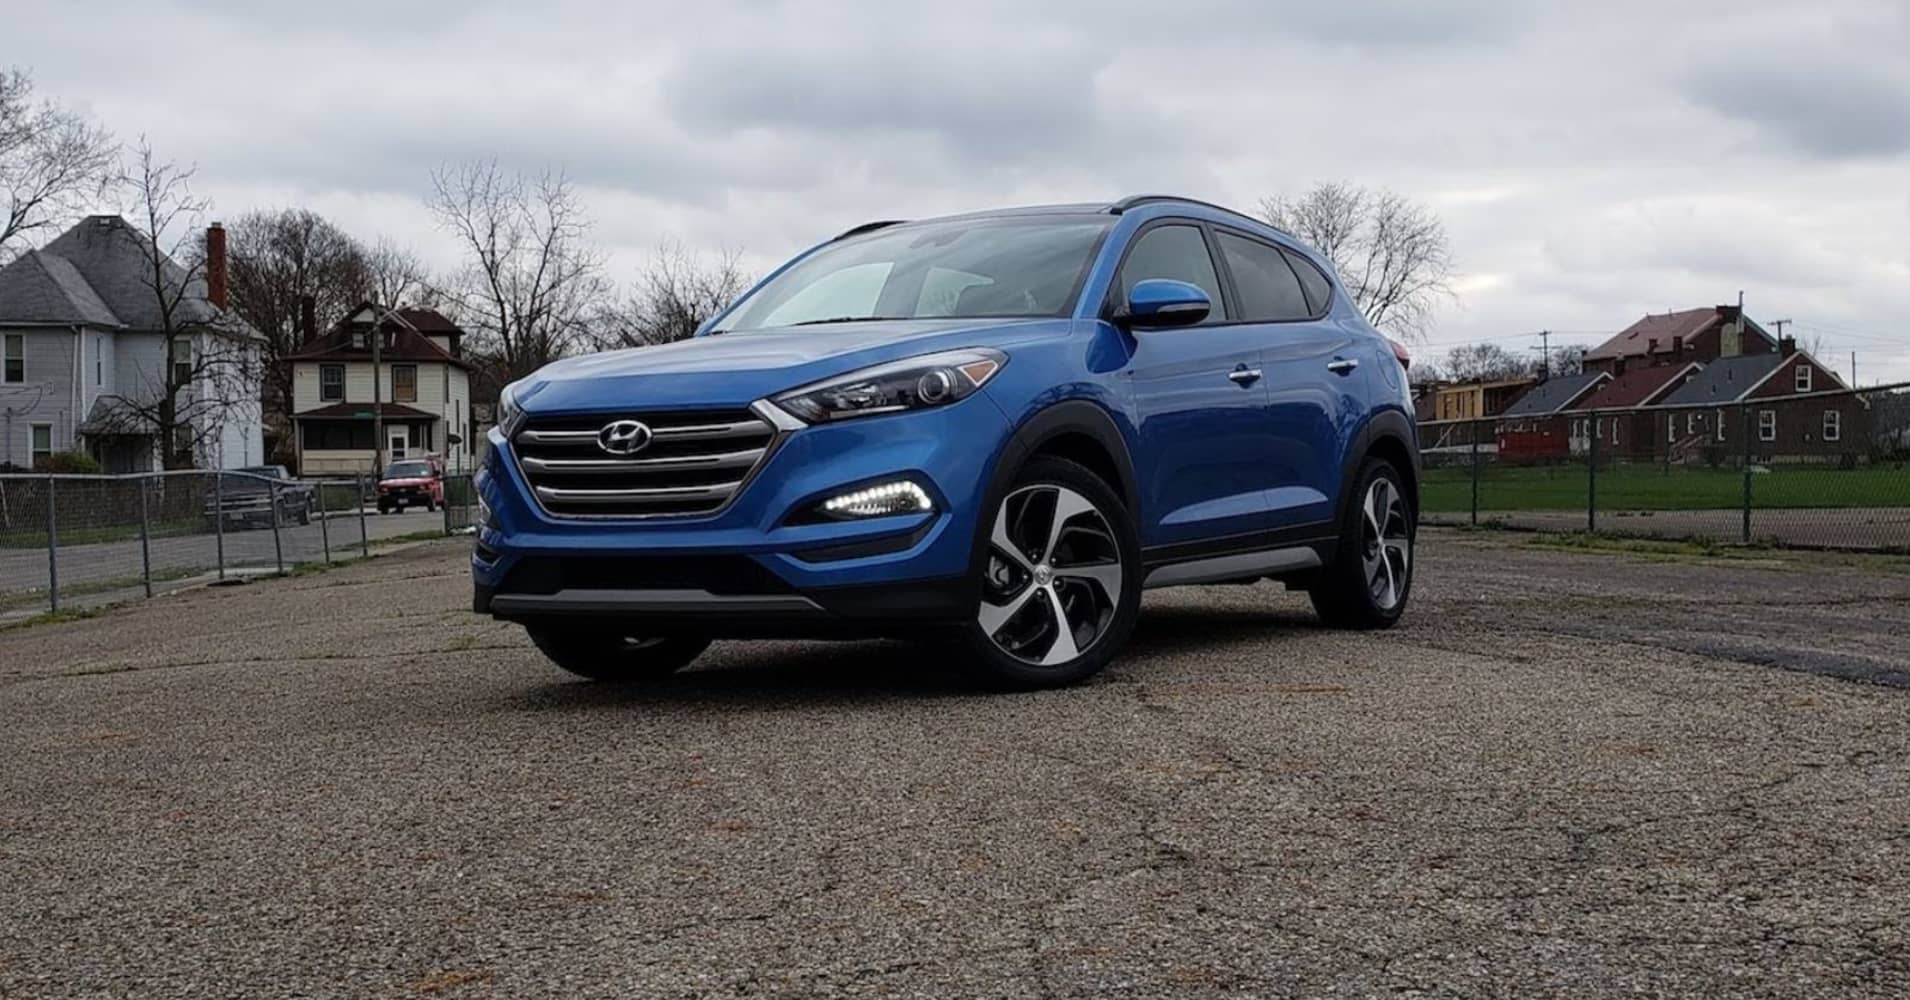 The 2018 Hyundai Tucson is a good bargain crossover